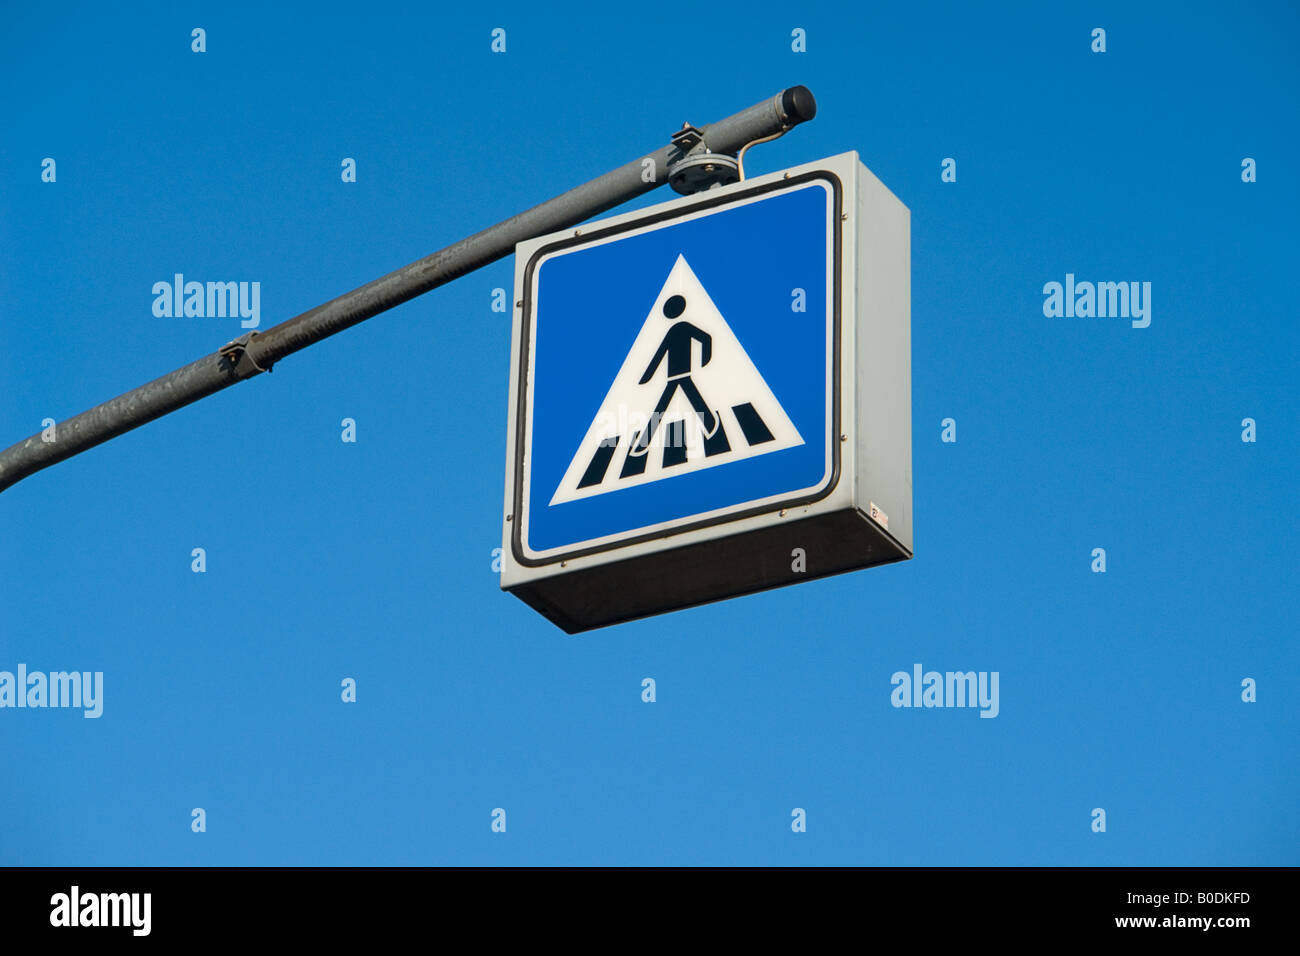 pedestrian crossing signs Stock Photo